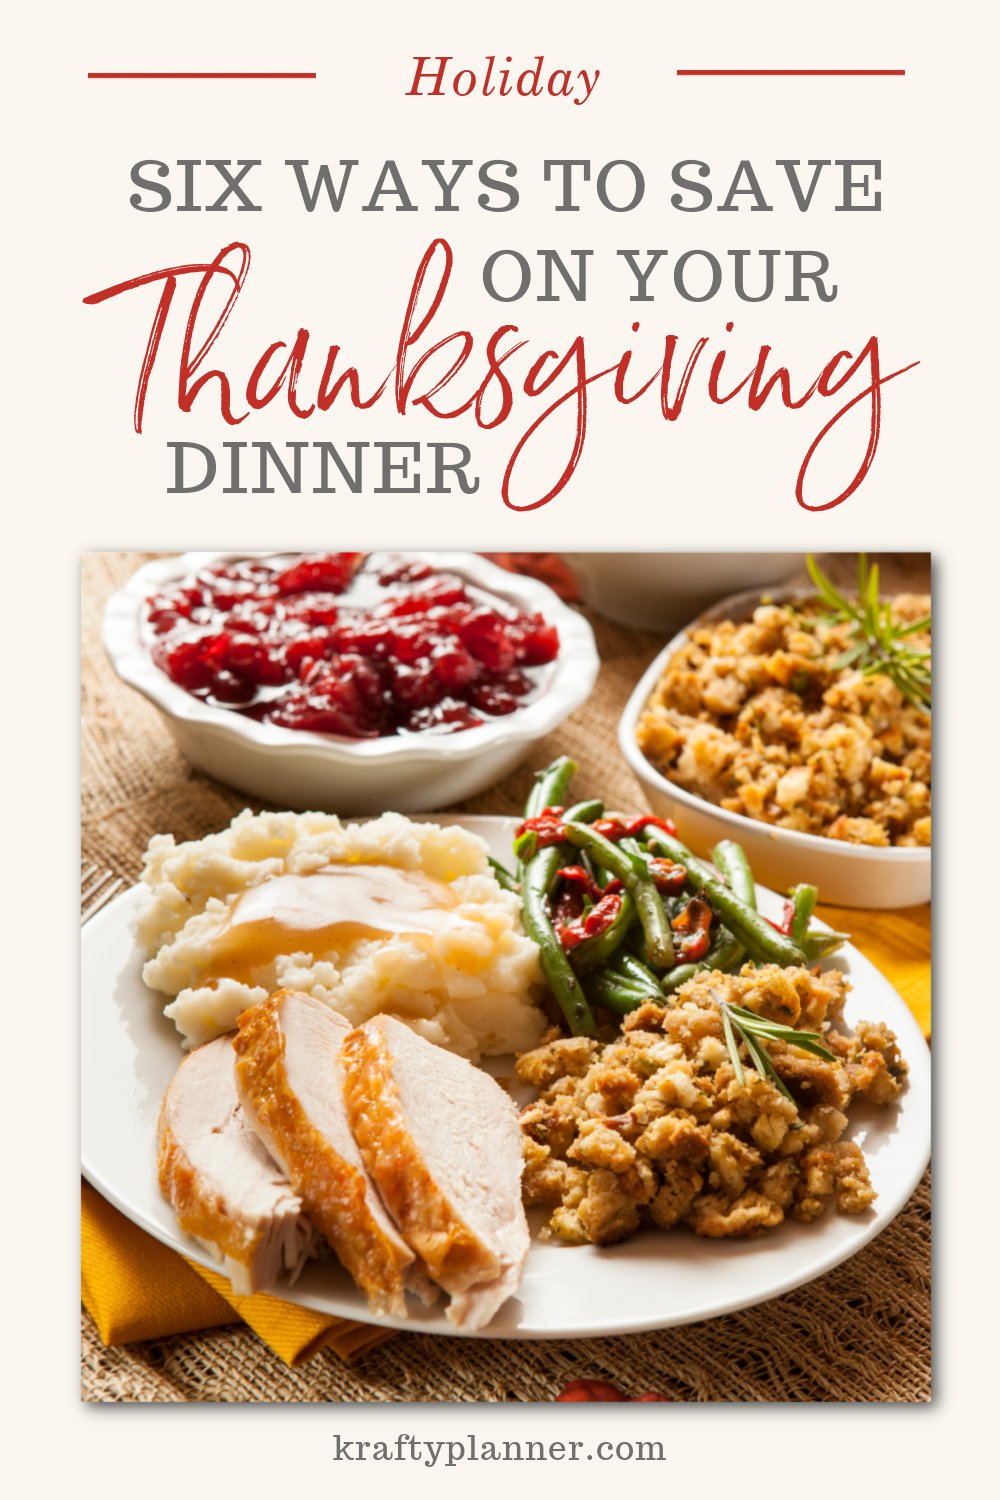 Six Ways to Save on Your Thanksgiving Dinner